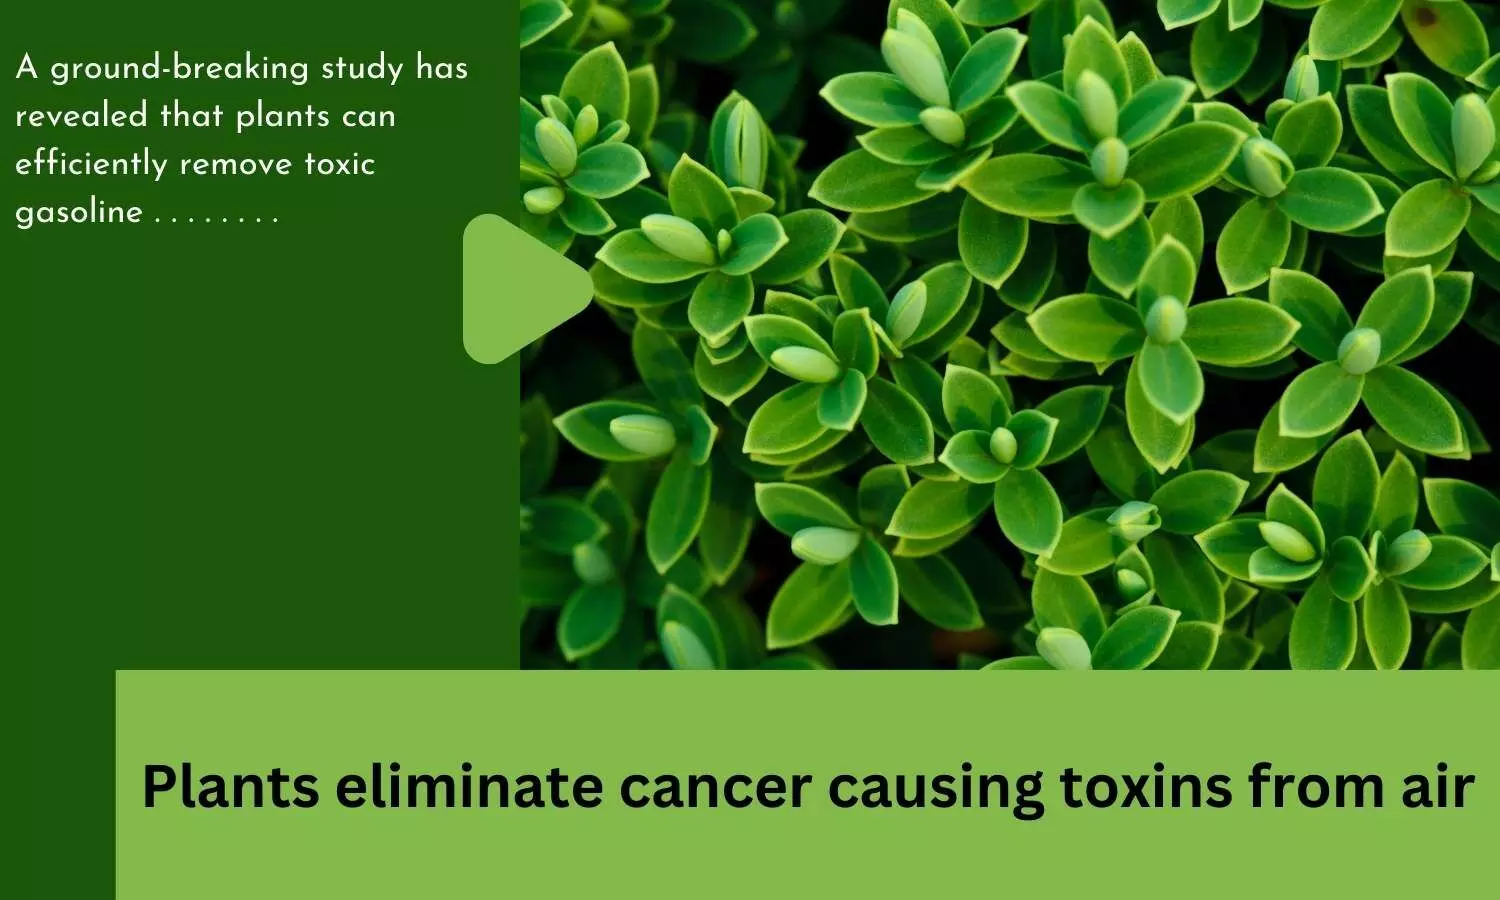 Plants eliminate cancer causing toxins from air